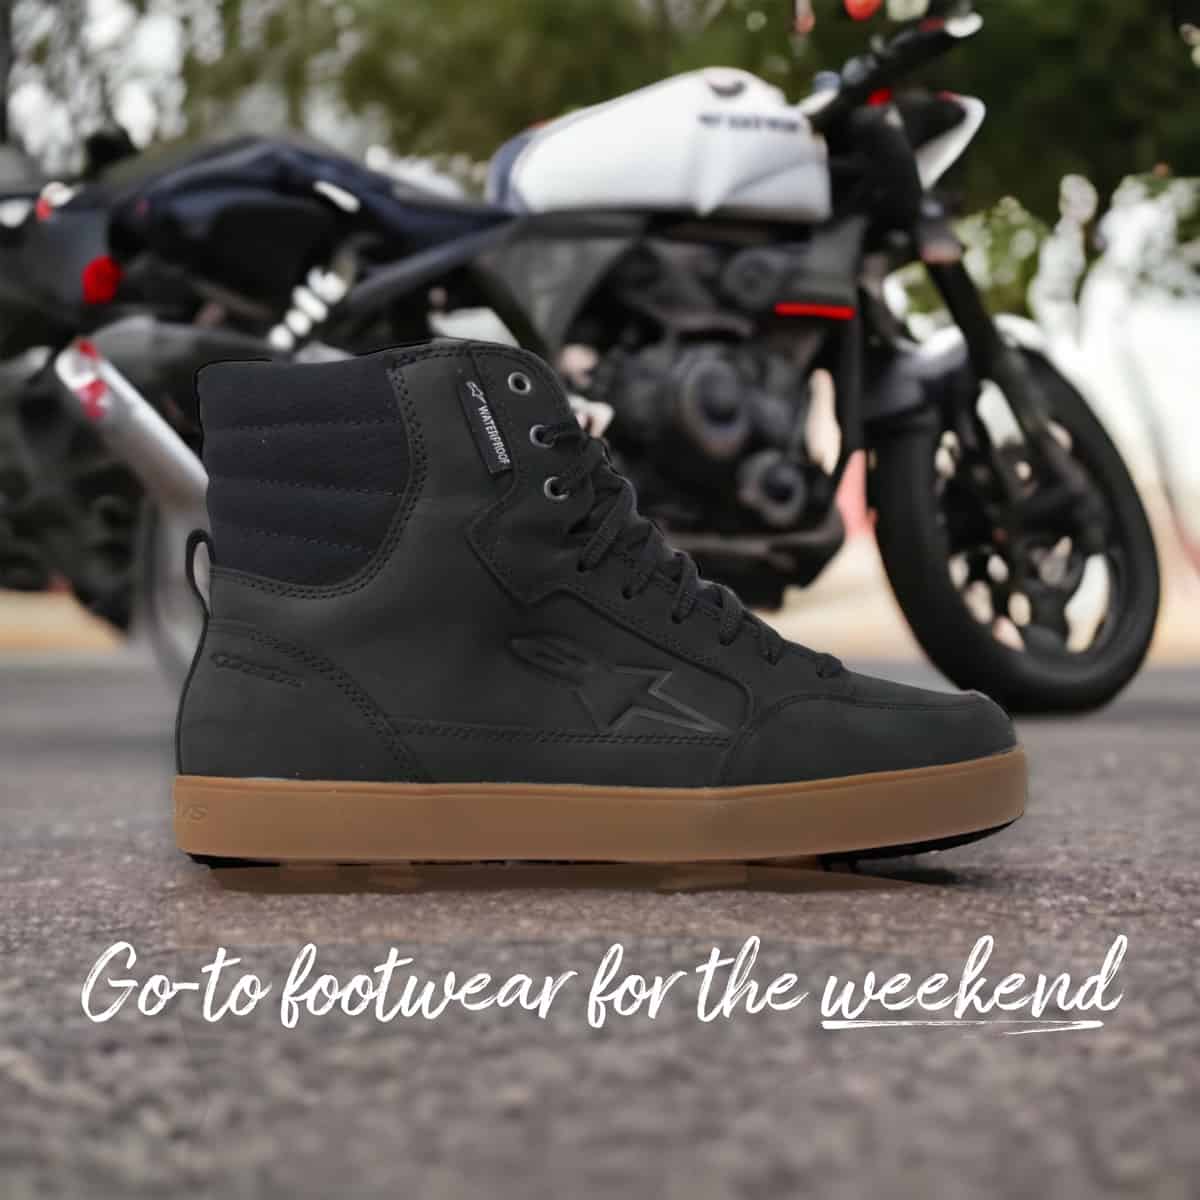 Alpinestars J6 Boots - perfect for the weekend